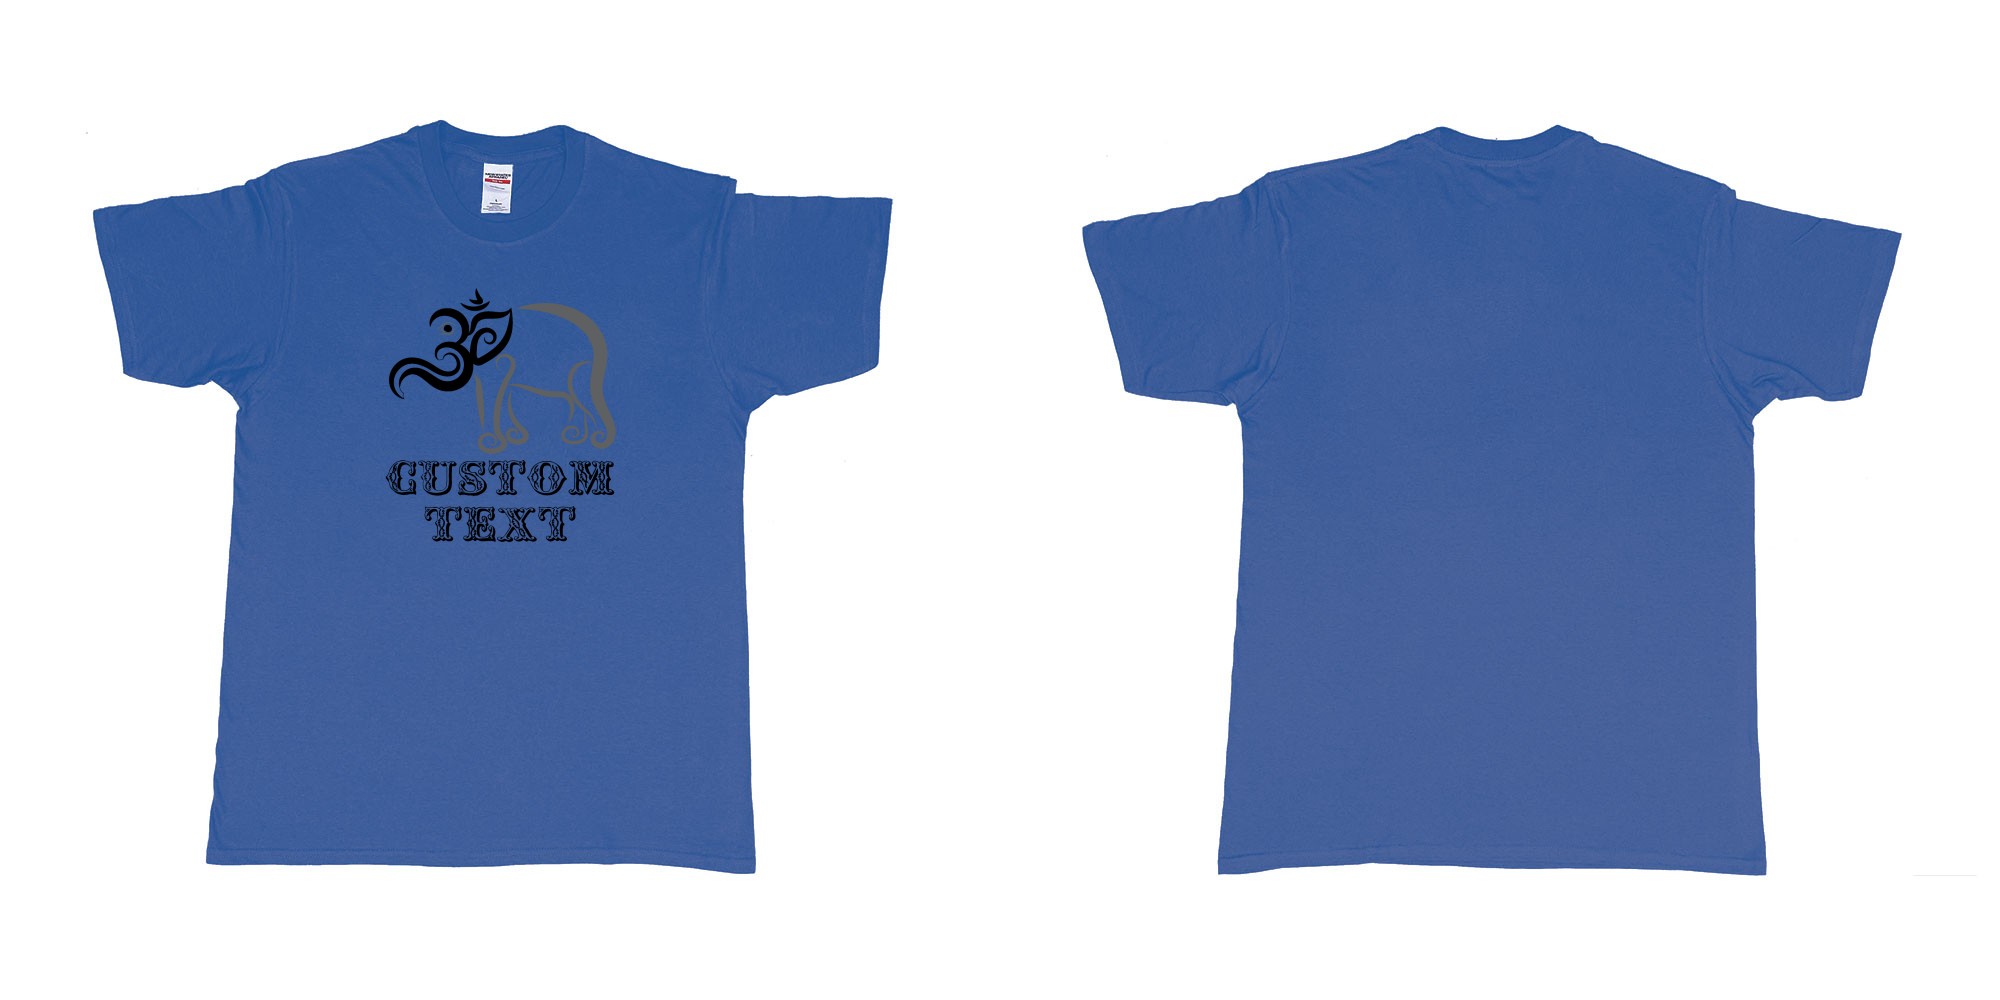 Custom tshirt design om elephant design in fabric color royal-blue choice your own text made in Bali by The Pirate Way